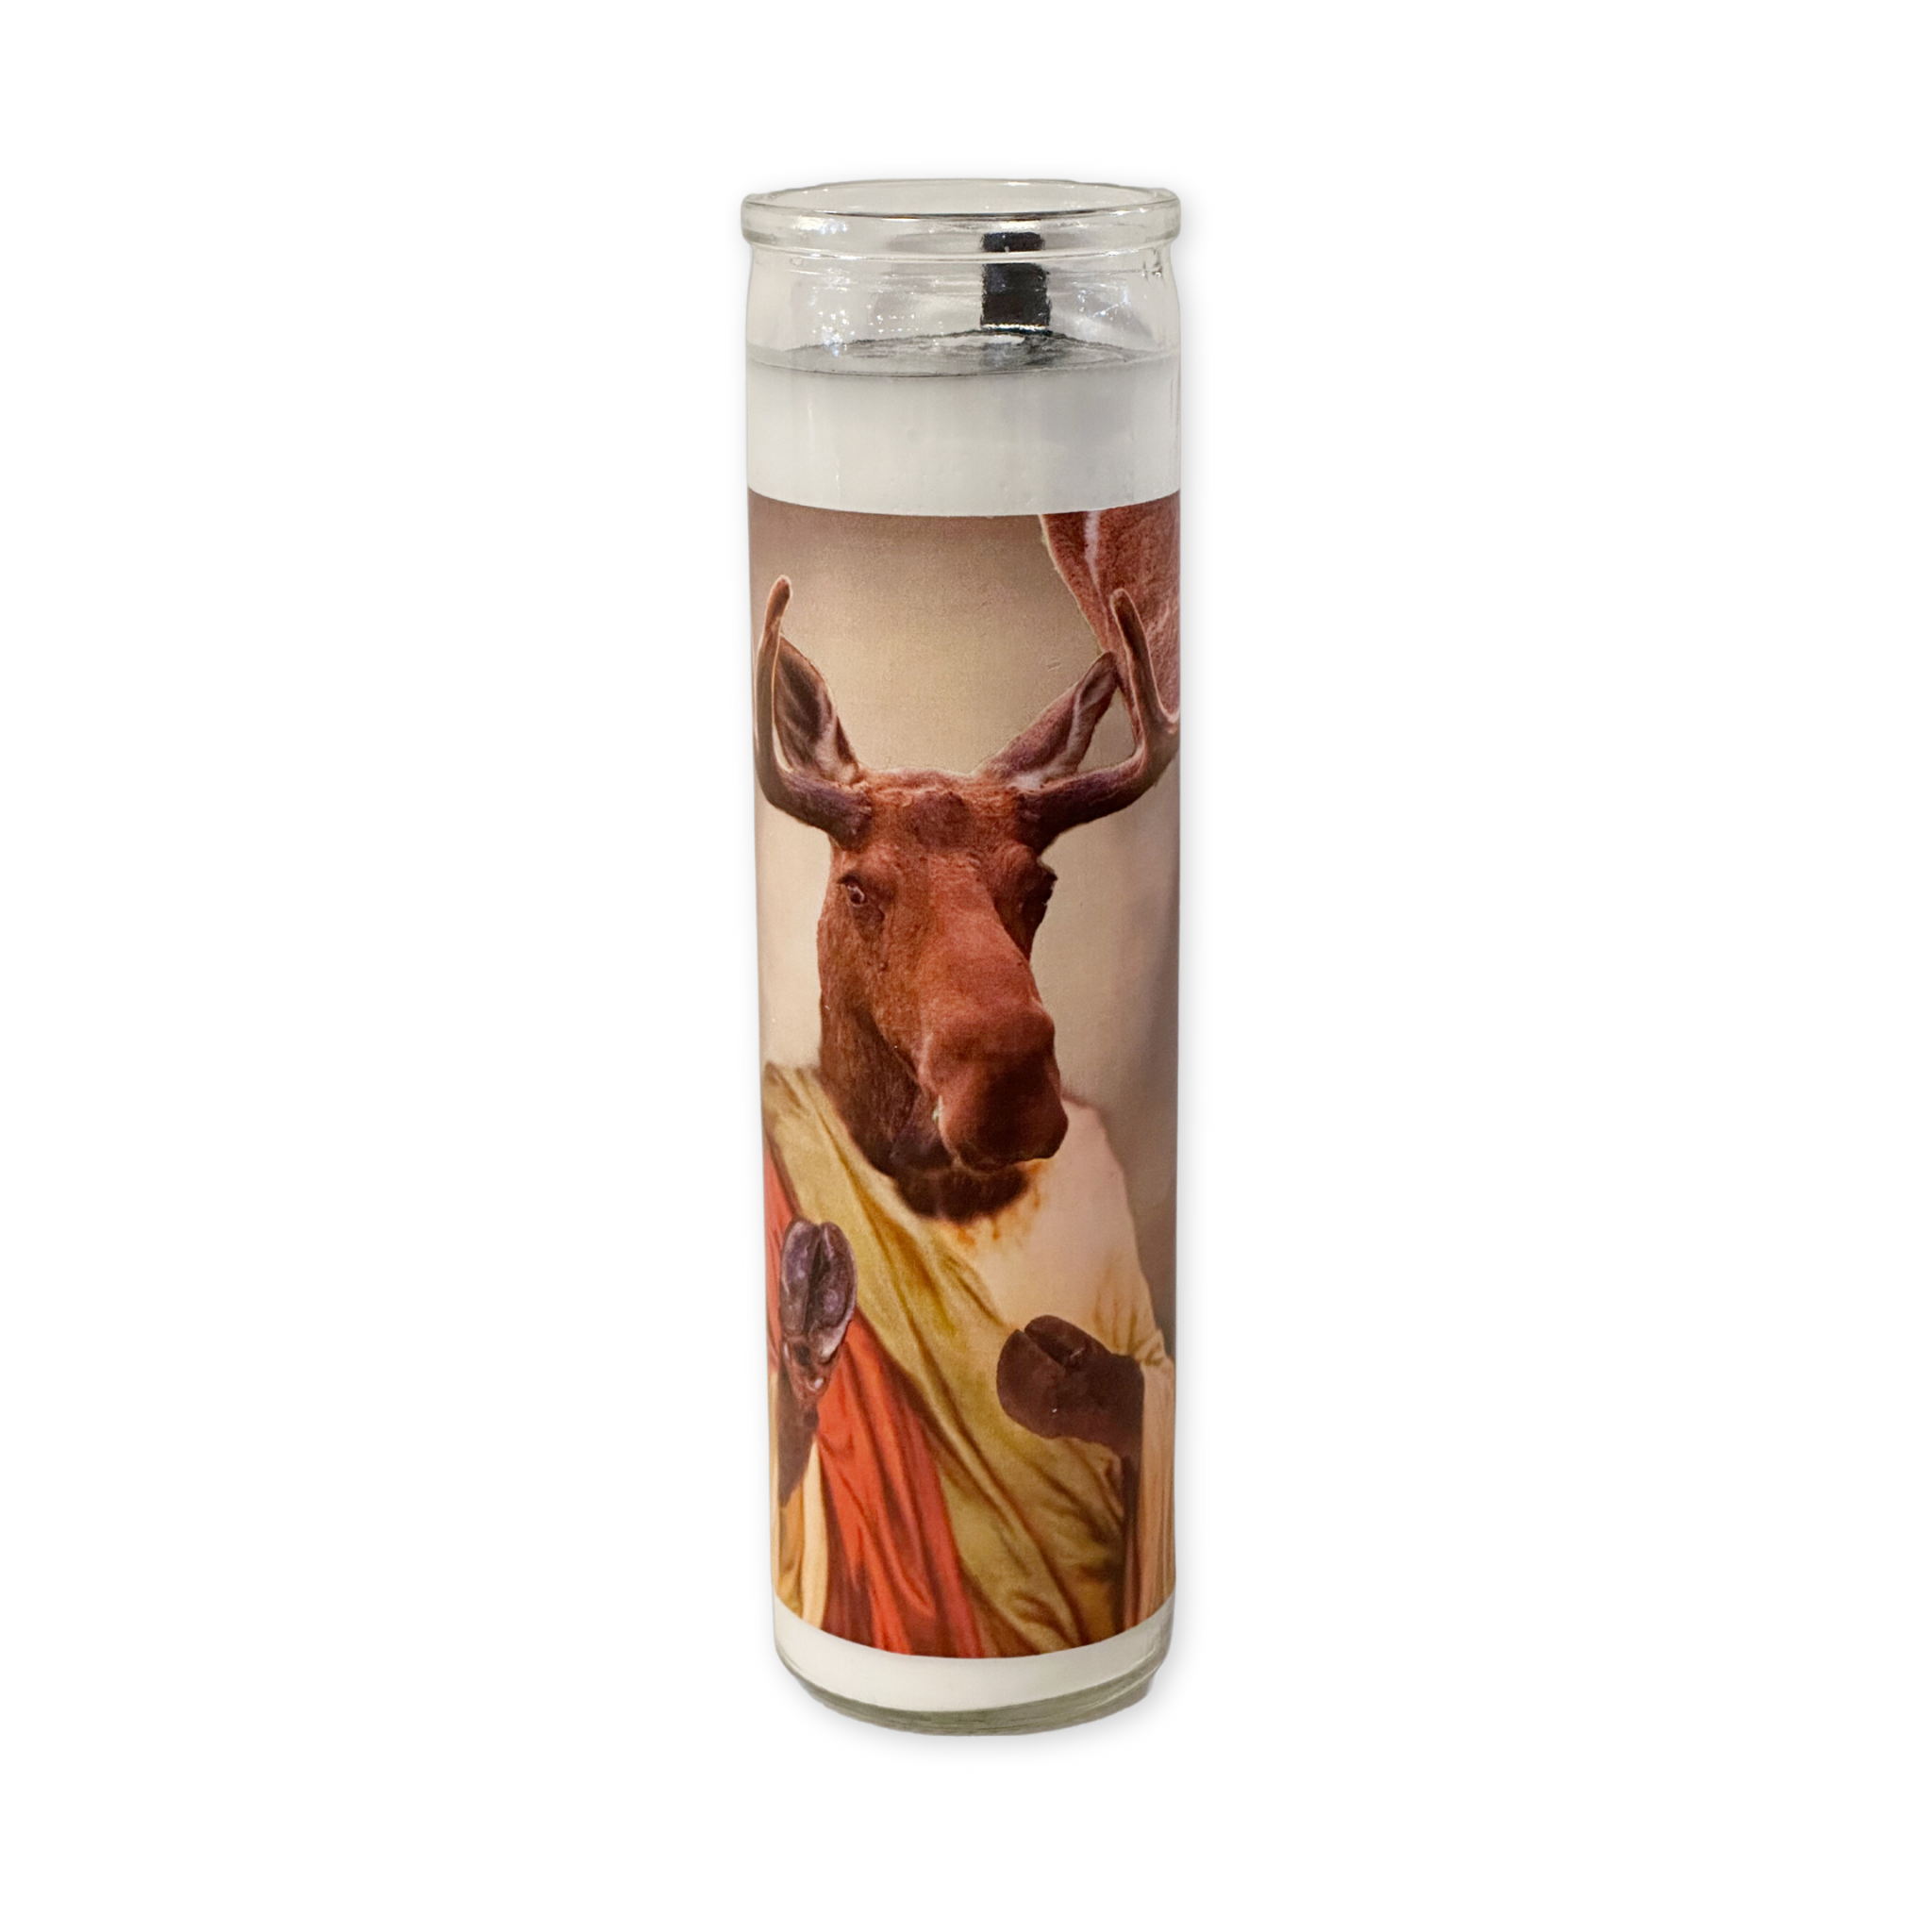 unscented prayer candle with a moose